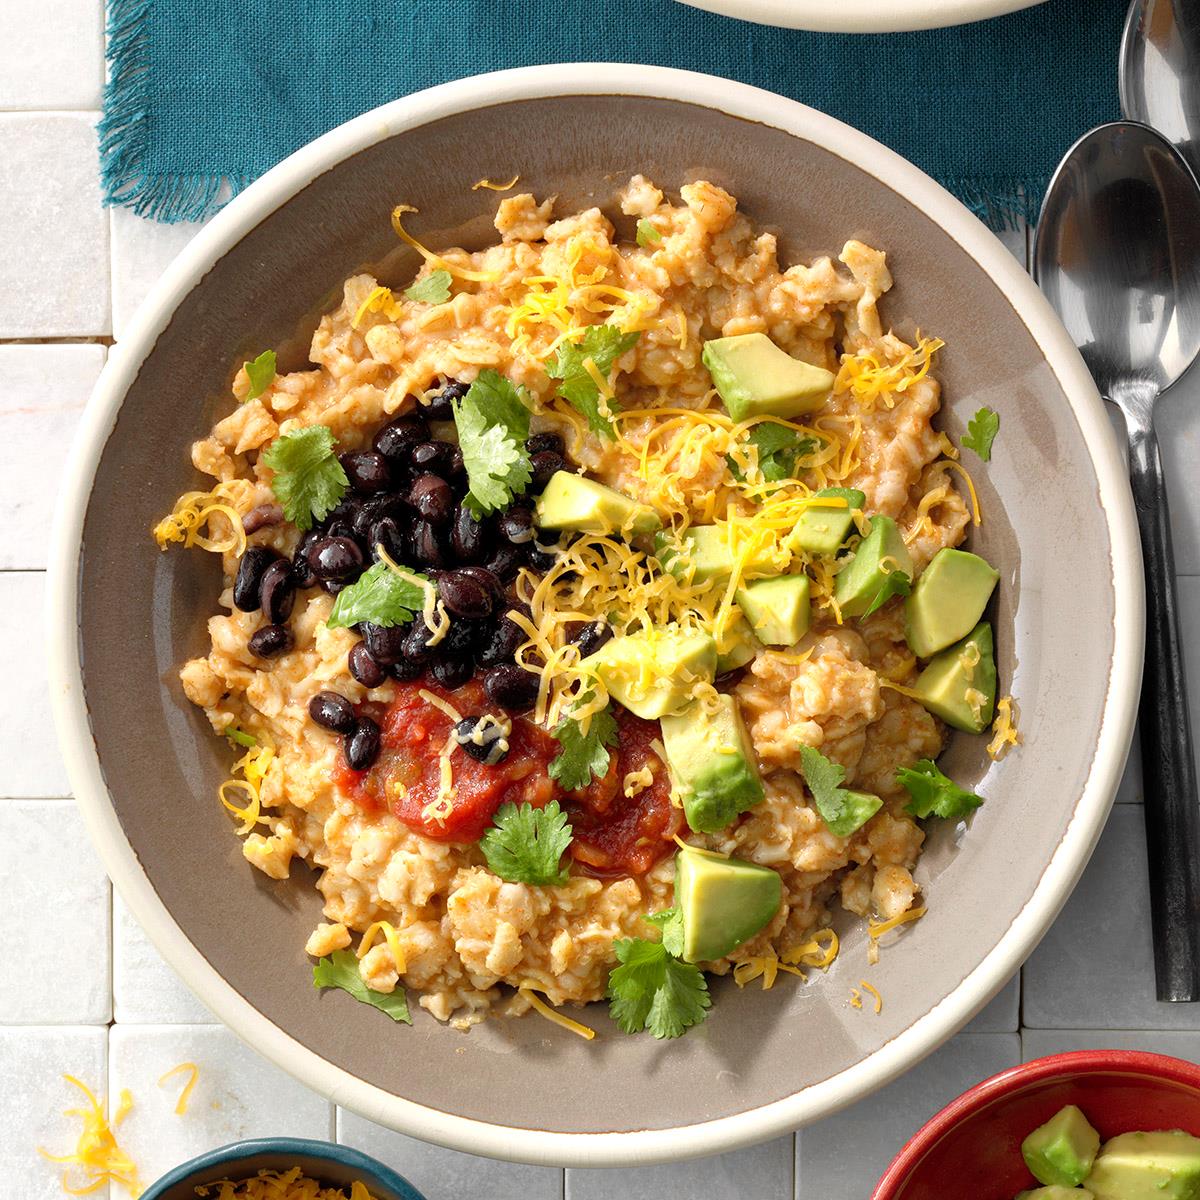 Tex-mex grain bowl, hot cereal topped with beans, avocado, and shredded cheese